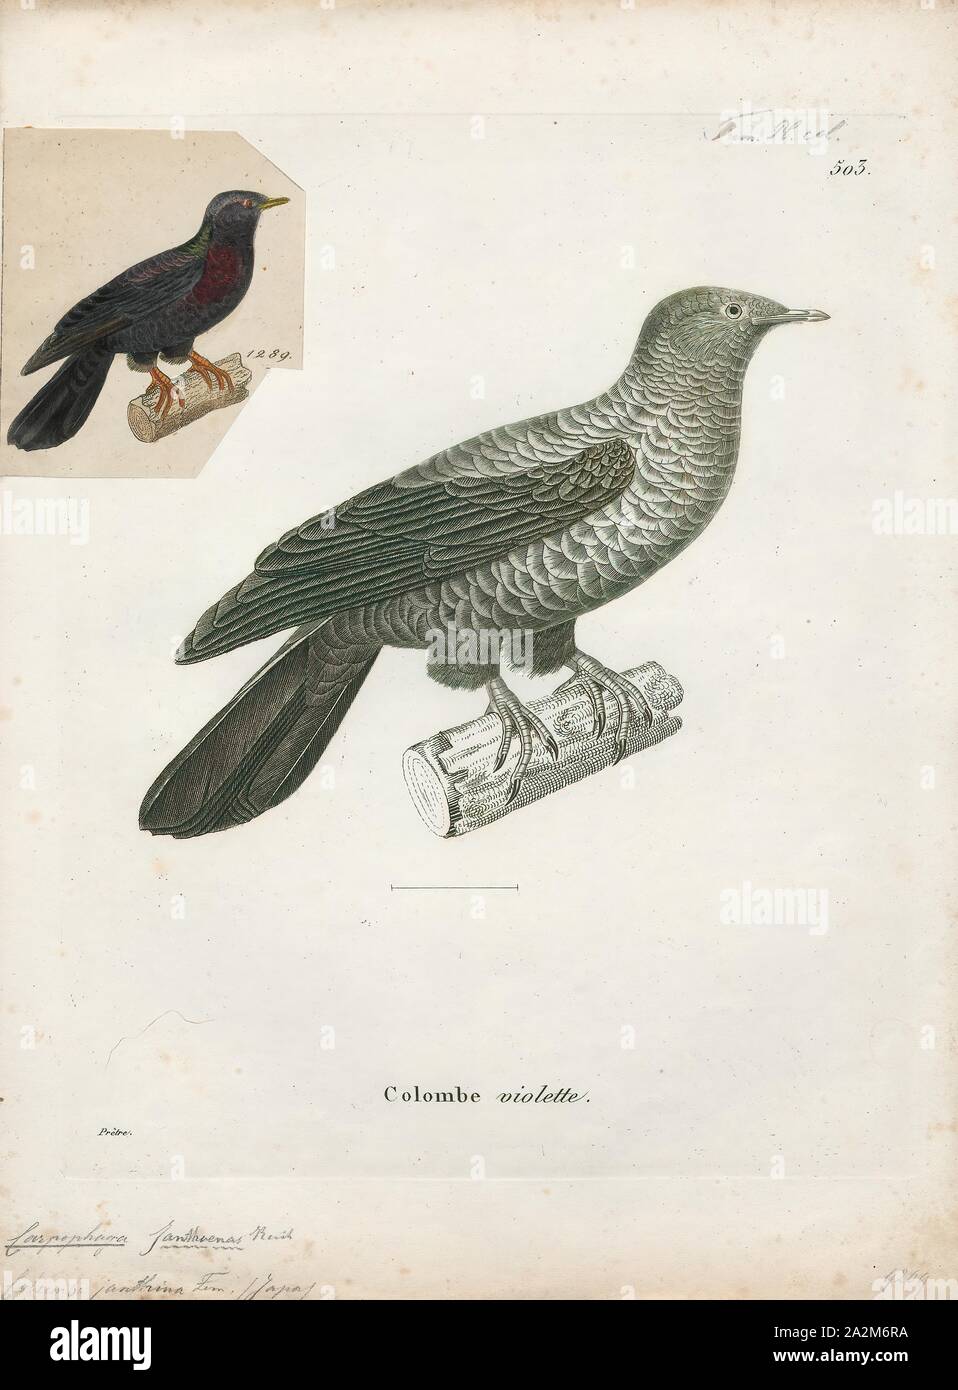 Carpophaga janthina, Print, The Ryukyu wood pigeon (Columba jouyi), otherwise known as the silver-banded or silver-crescented pigeon is an extinct species of bird in the Columba genus in the family Columbidae. This wood pigeon was endemic to the Laurel forest habitat., 1700-1880 Stock Photo